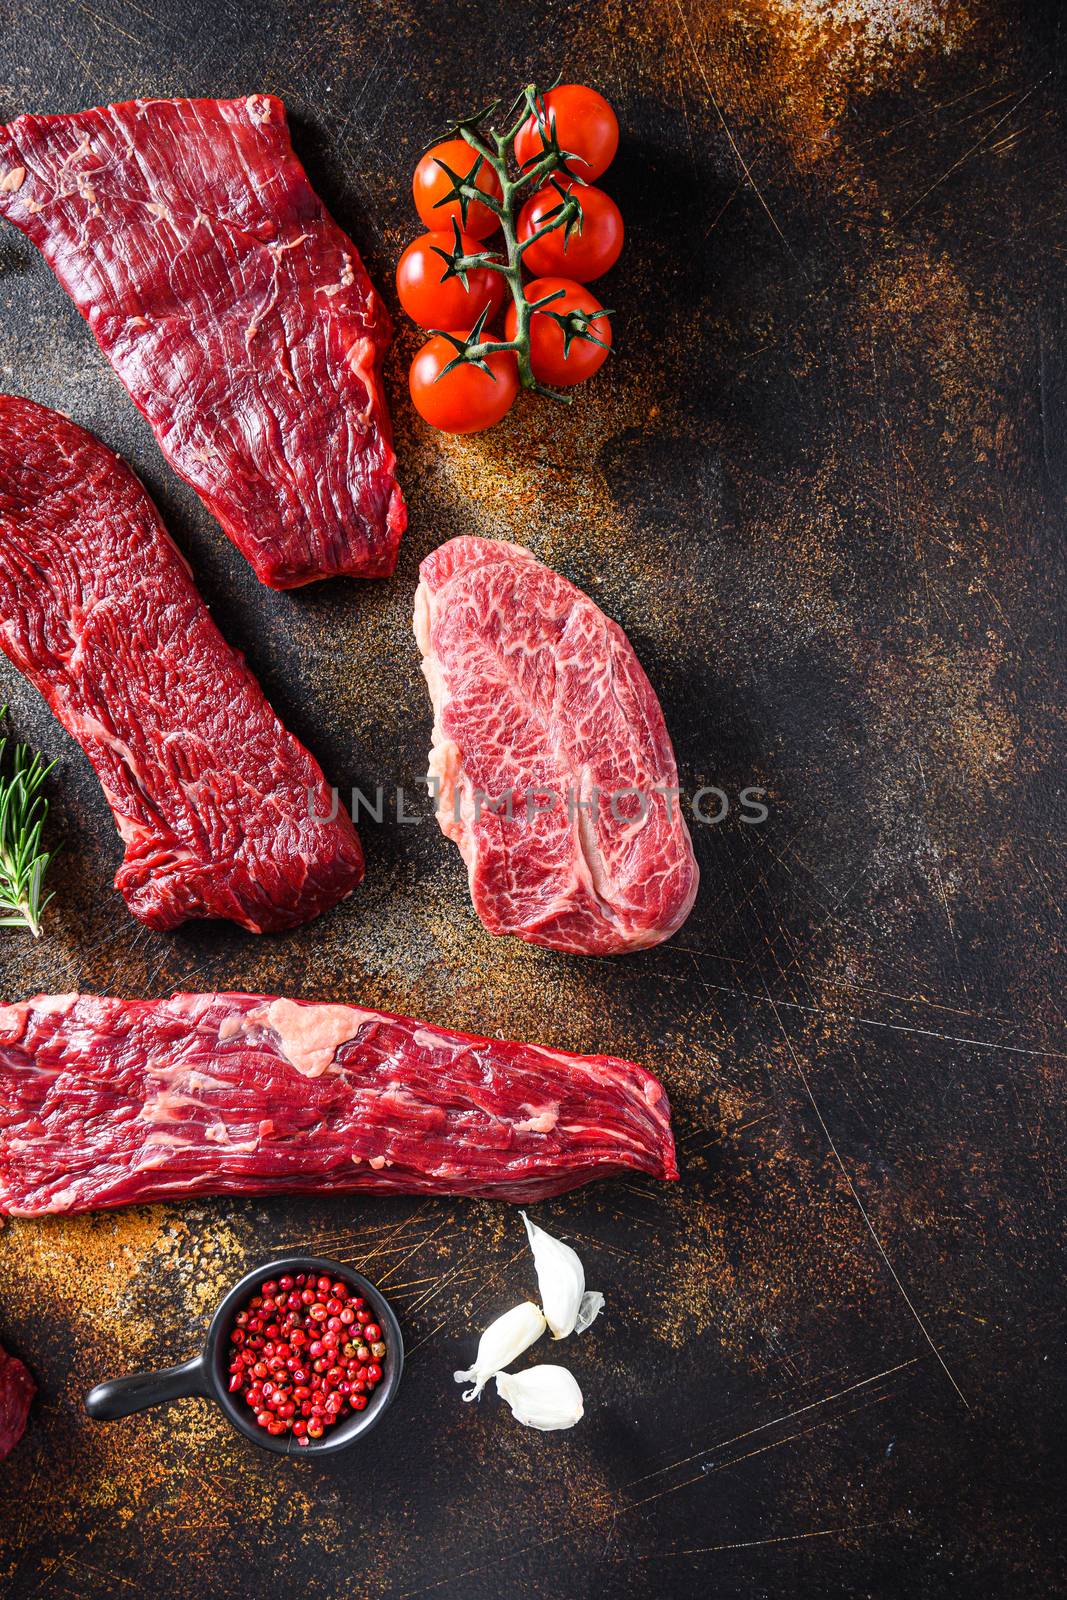 Organic set of raw alternative beef steaks flap flank Steak, machete steak or skirt cut, Top blade or flat iron beef and tri tip, triangle roast with denver cut side view over old rustic metal surface space for text on side by Ilianesolenyi